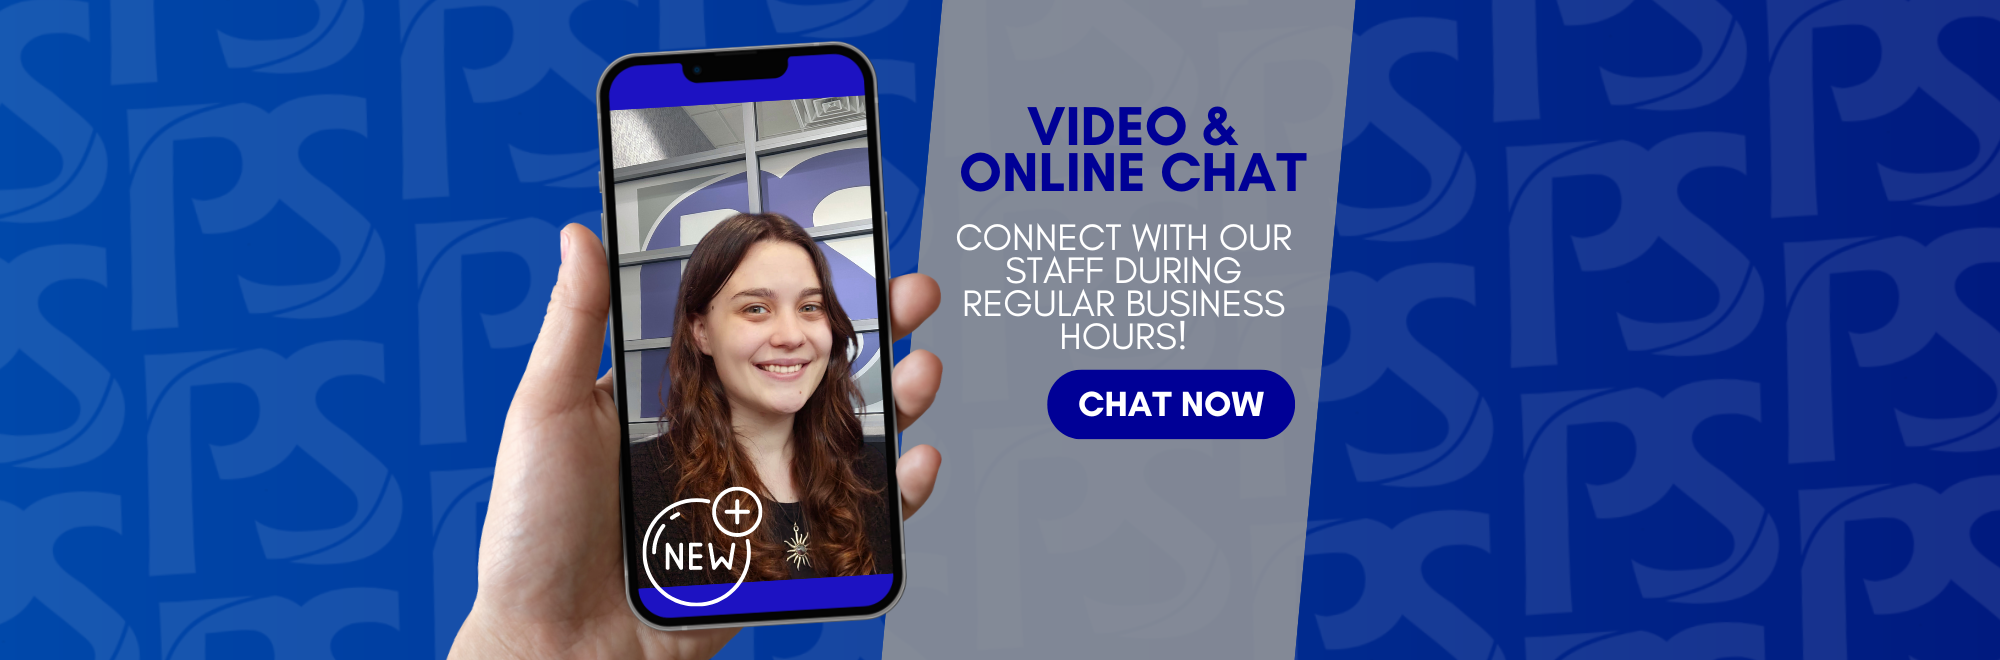 Now Available Video and Online Chat with our staff during regular business hours!